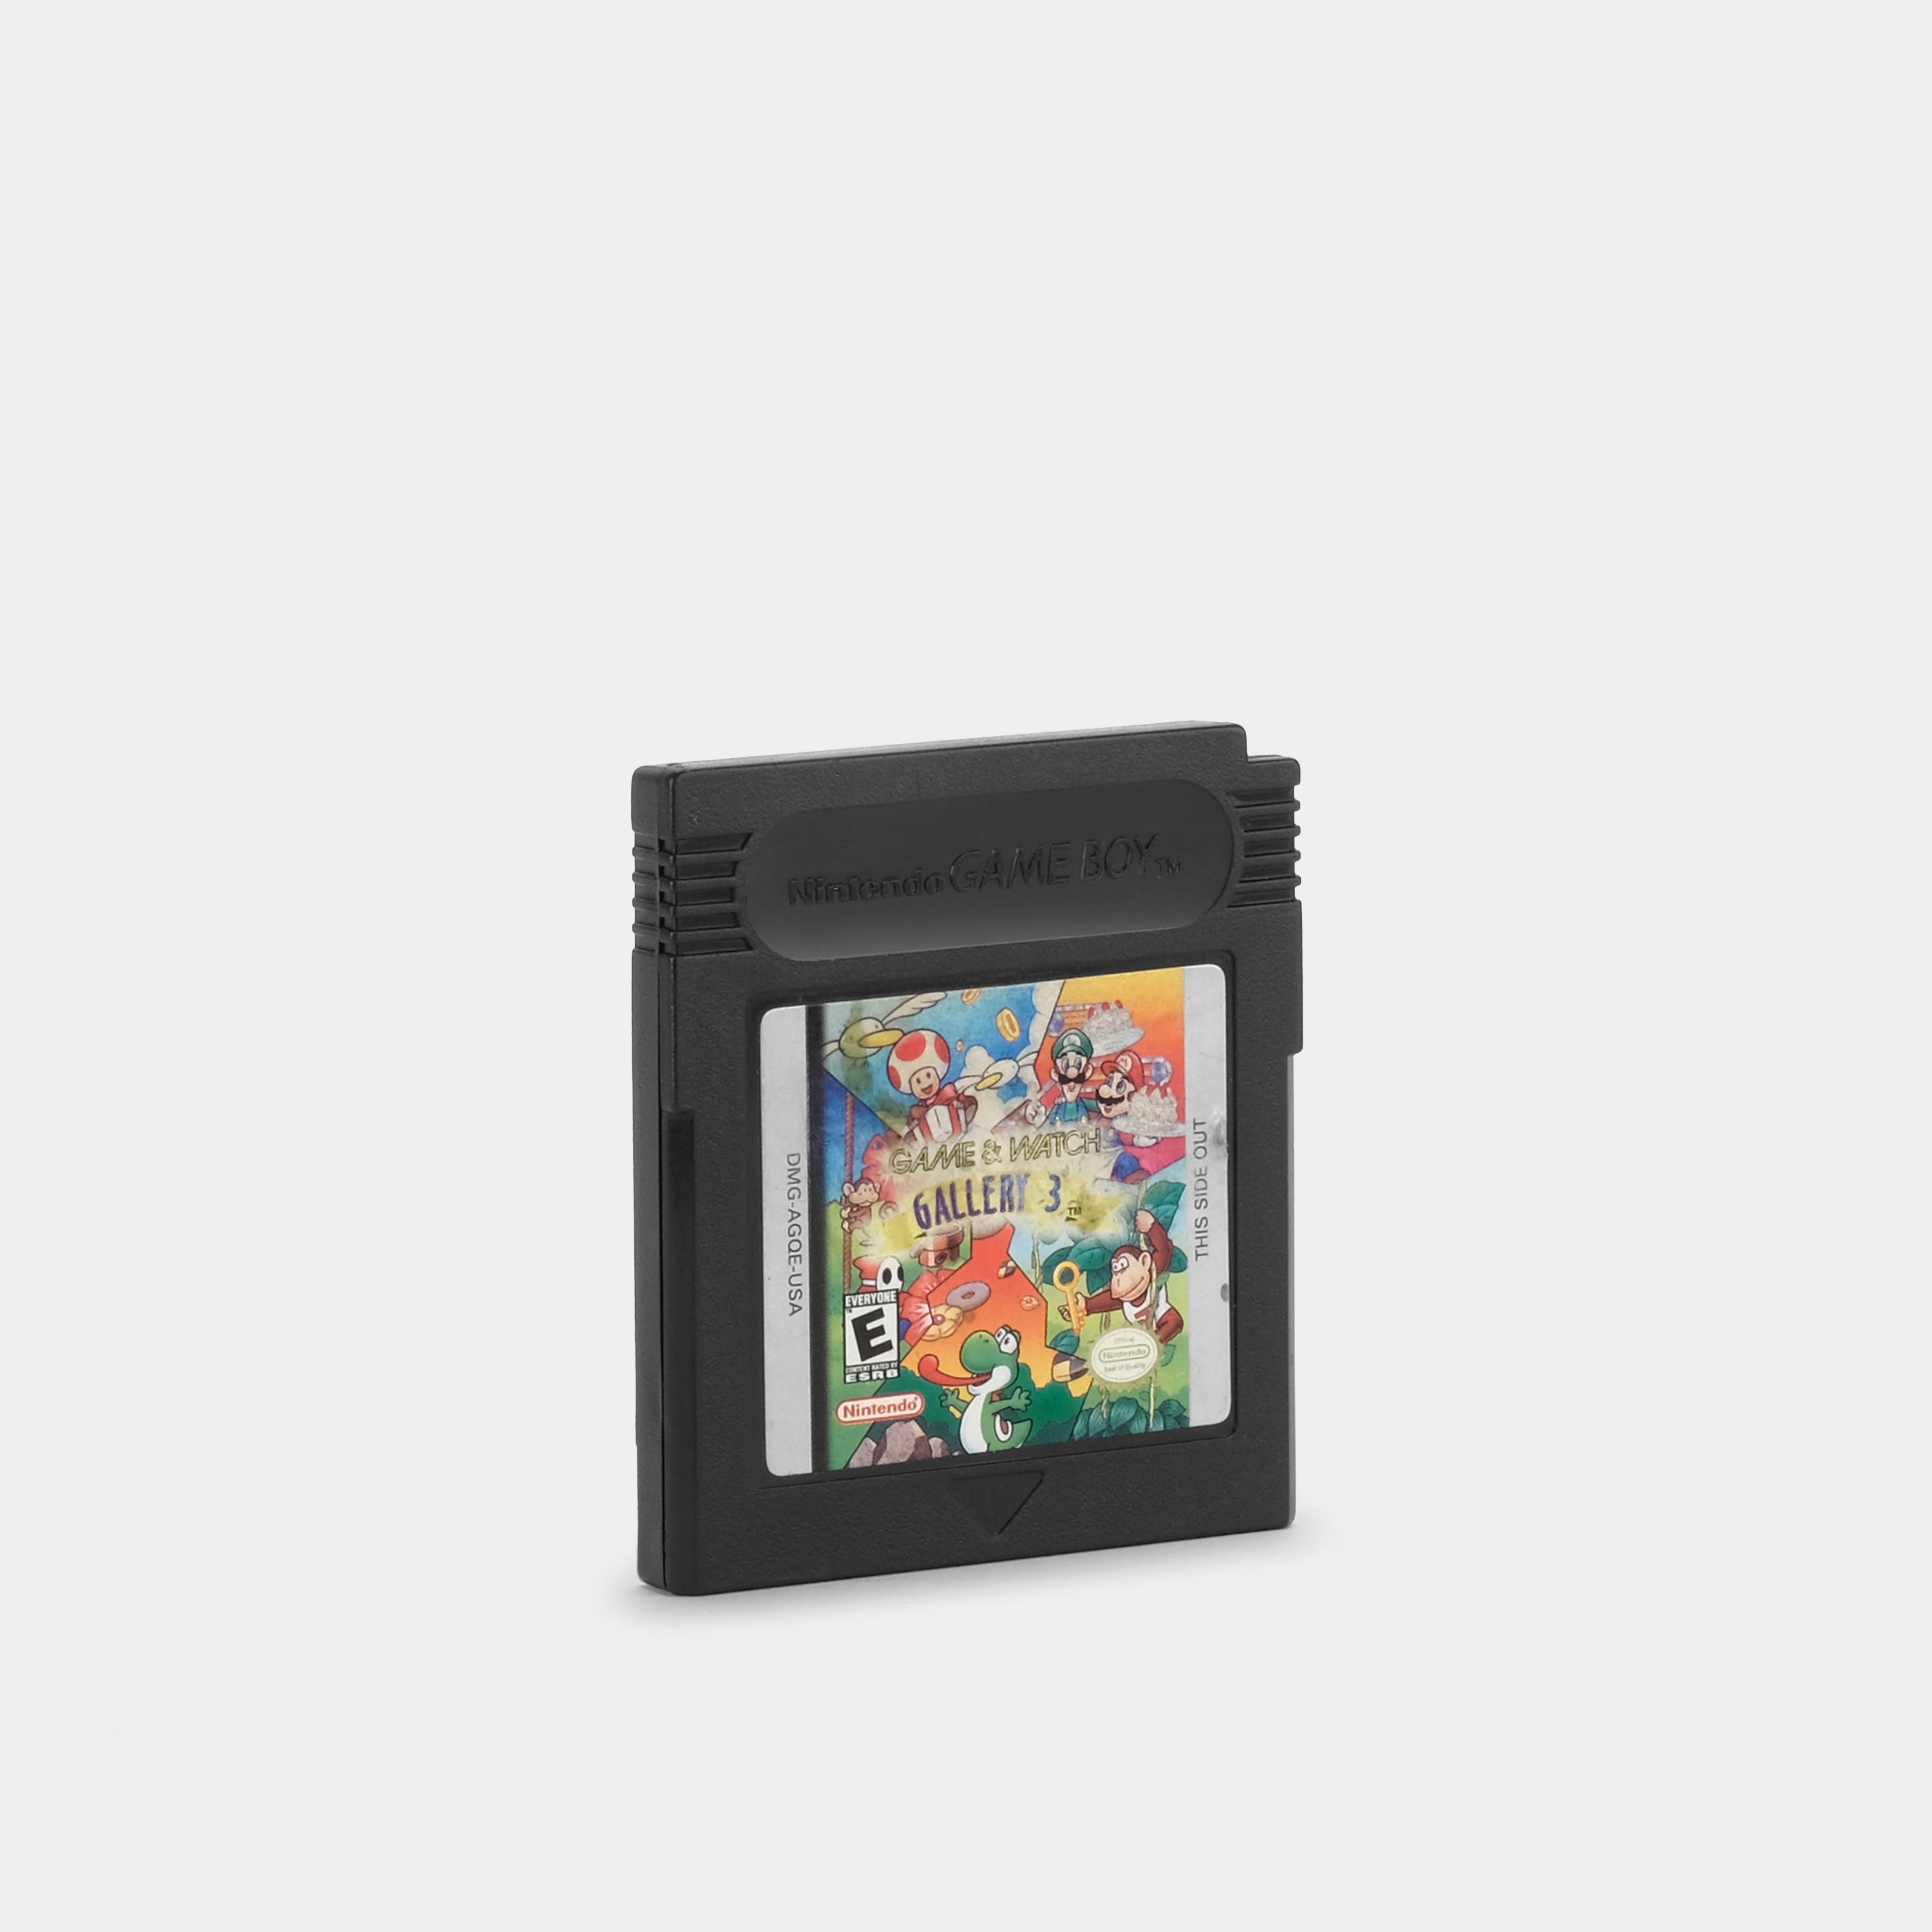 Game & Watch Gallery 3 Game Boy Color Game